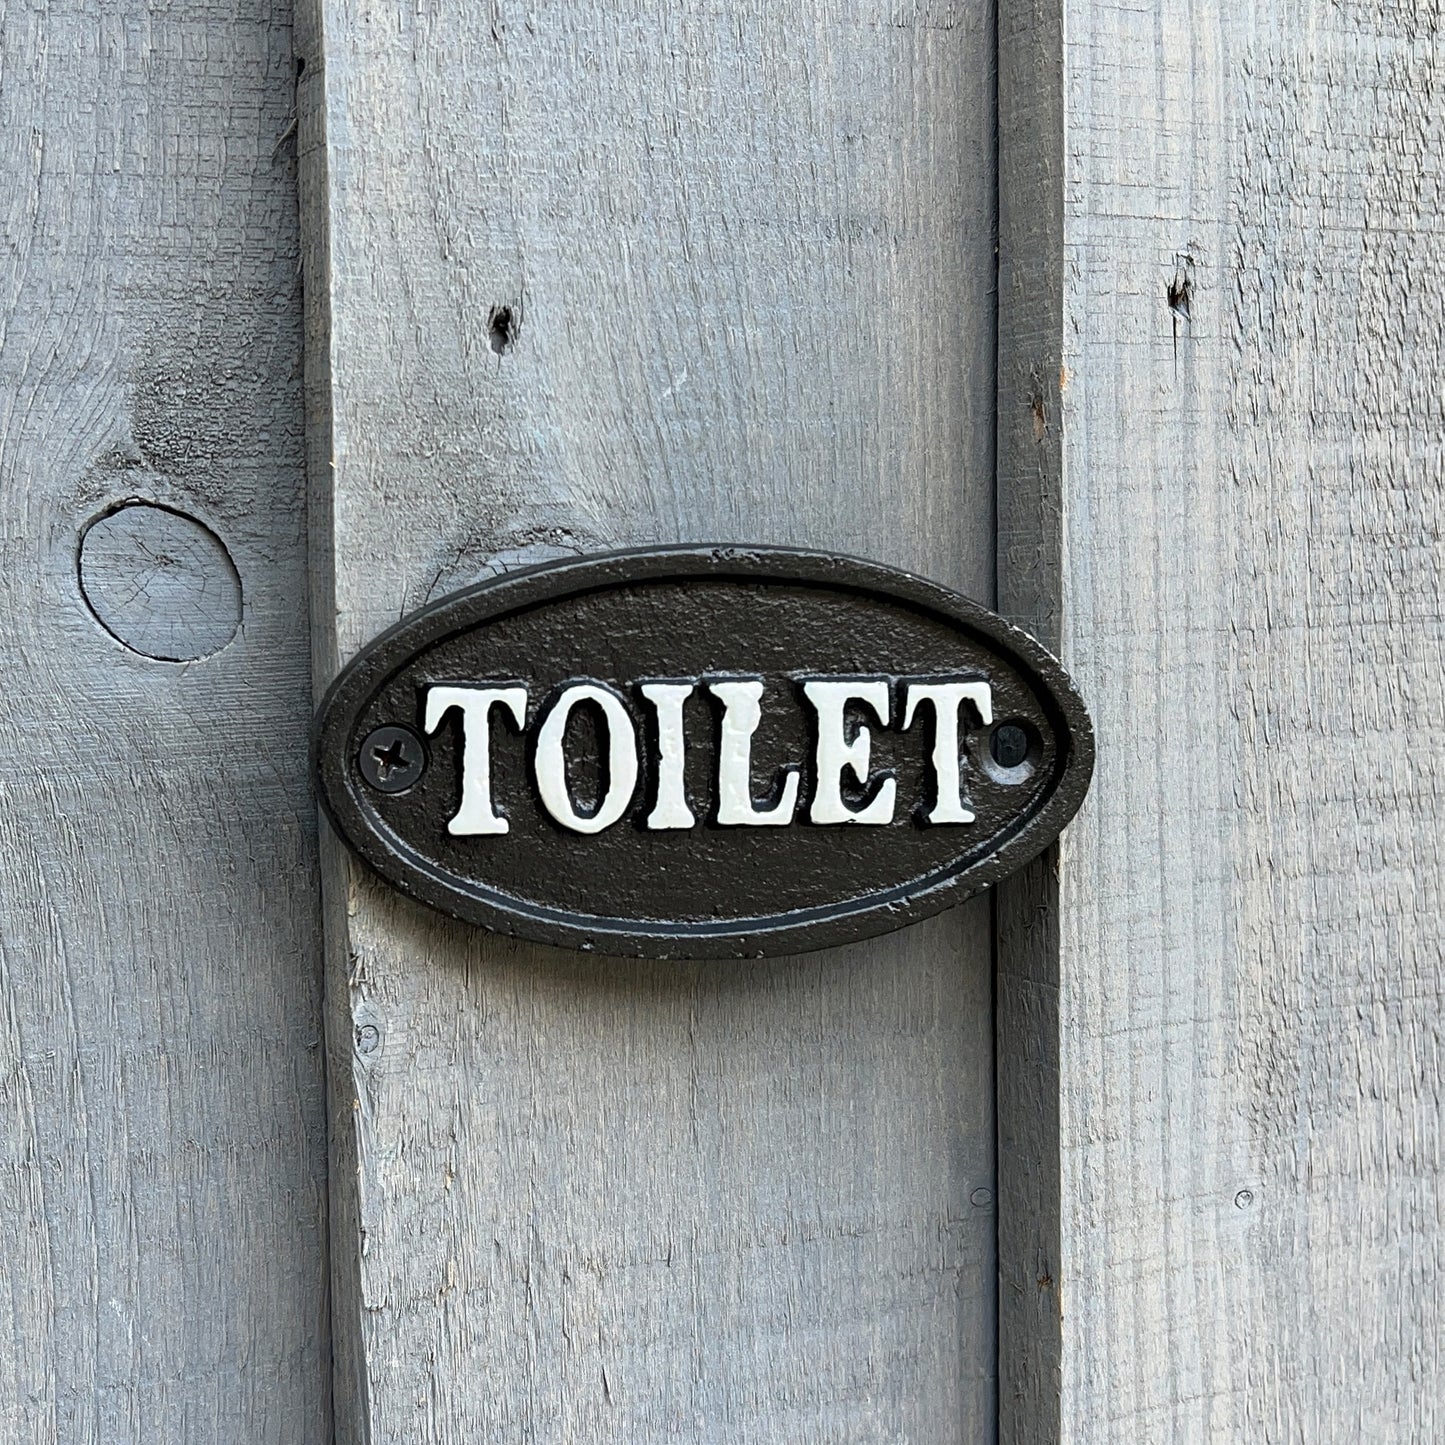 Oval Toilet Wall Plaque / Sign